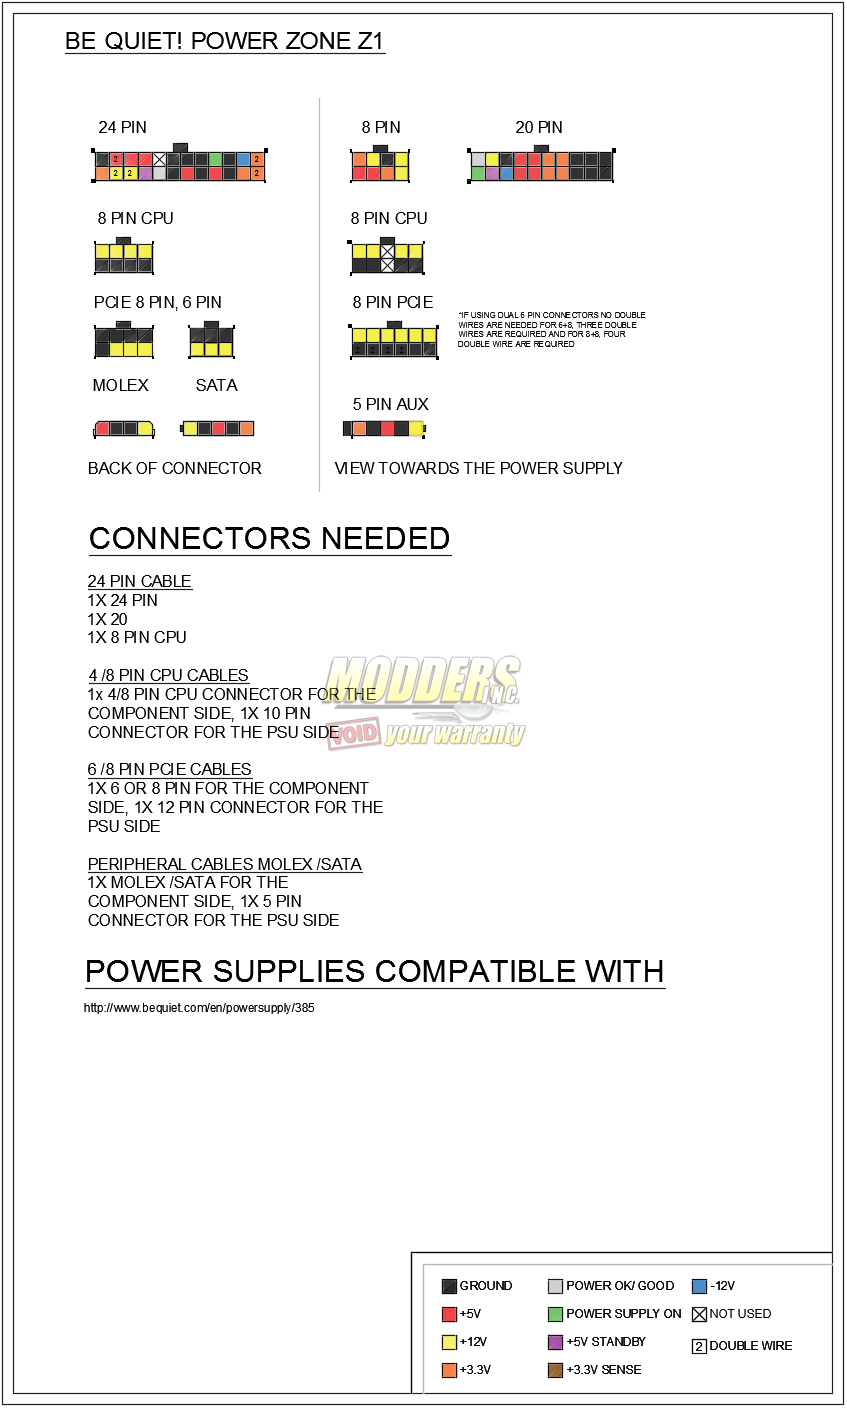 Be Quite! Power zone Z1 power supply pinout